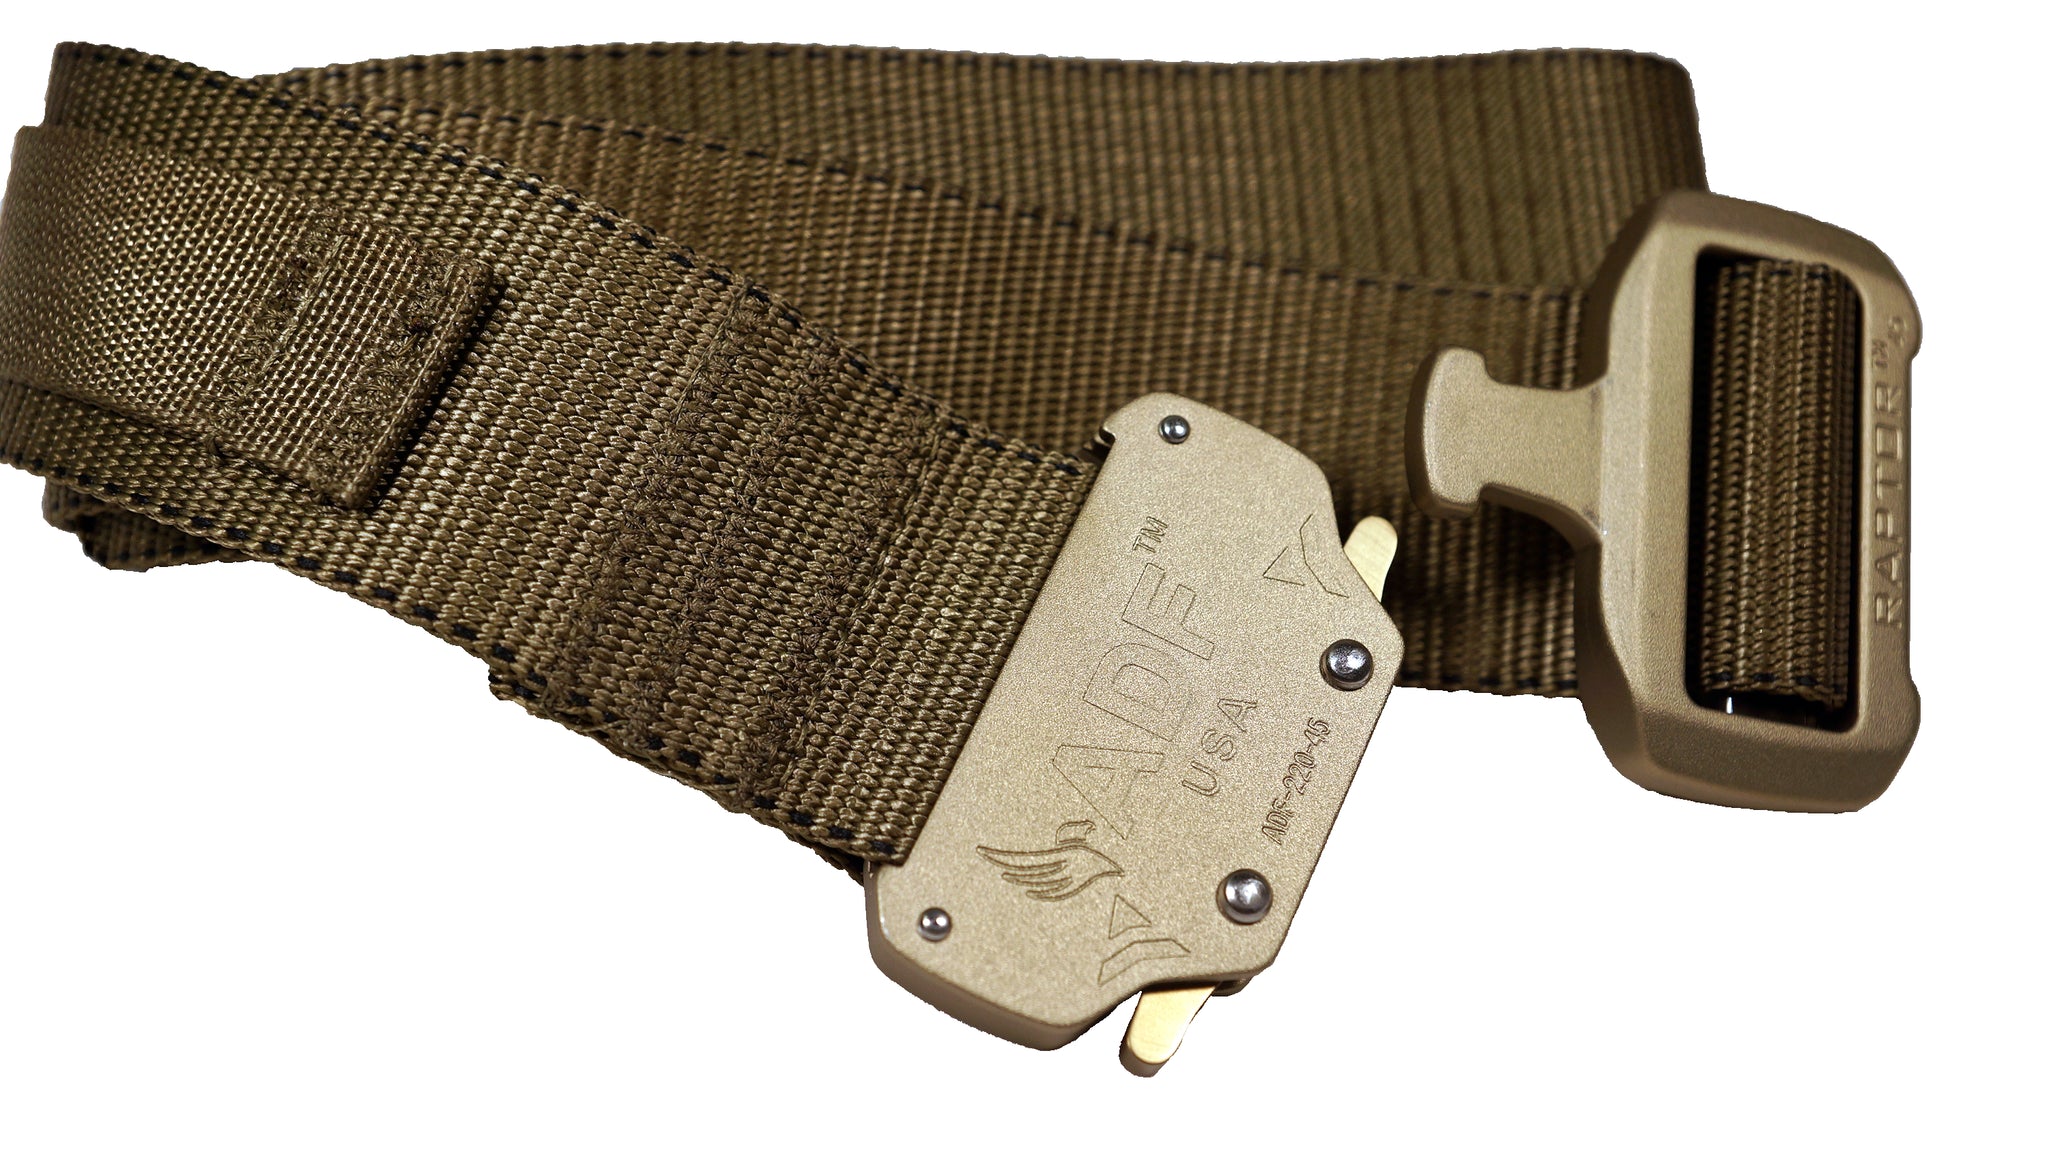 Tan/Coyote rigger’s style belt with added nylon loop and metal hook to secure a ThermoLuminescent Dosimeter or TLD.